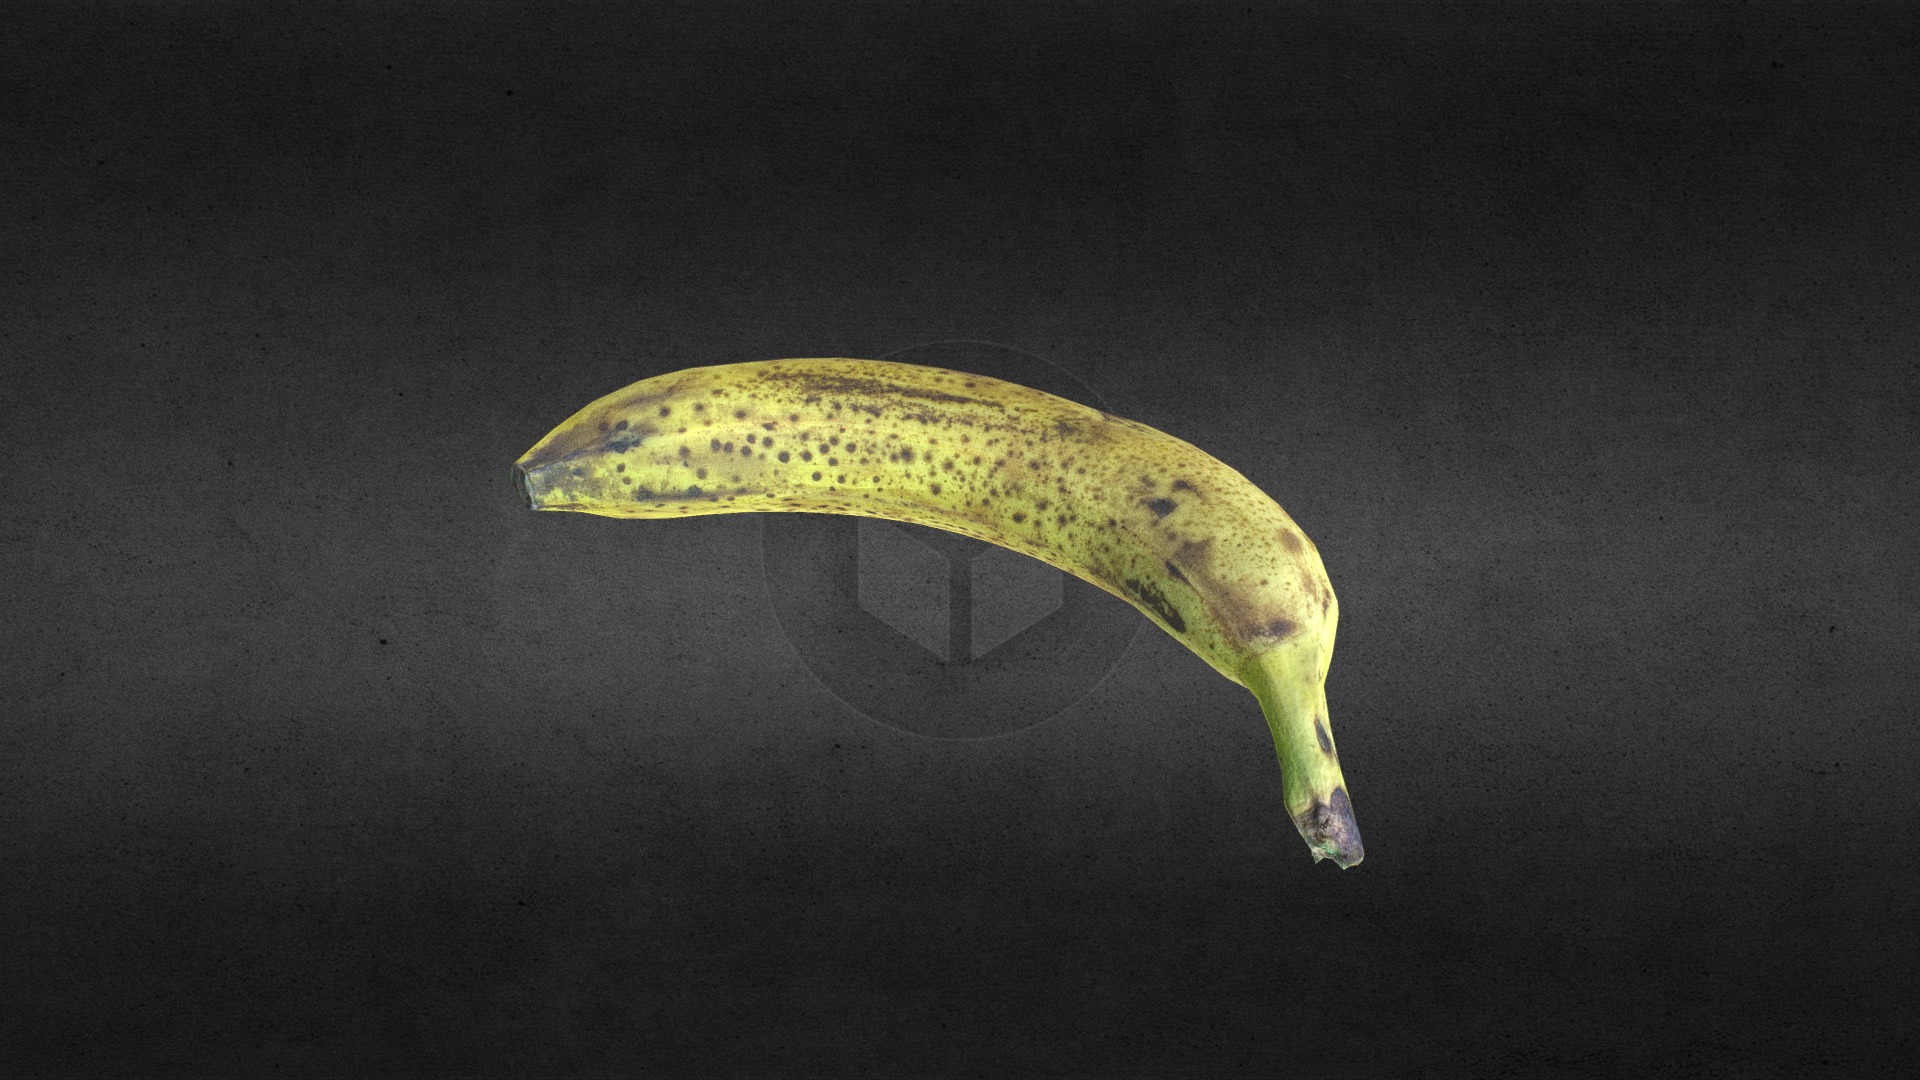 3D model Banana low poly - This is a 3D model of the Banana low poly. The 3D model is about a banana with a face.